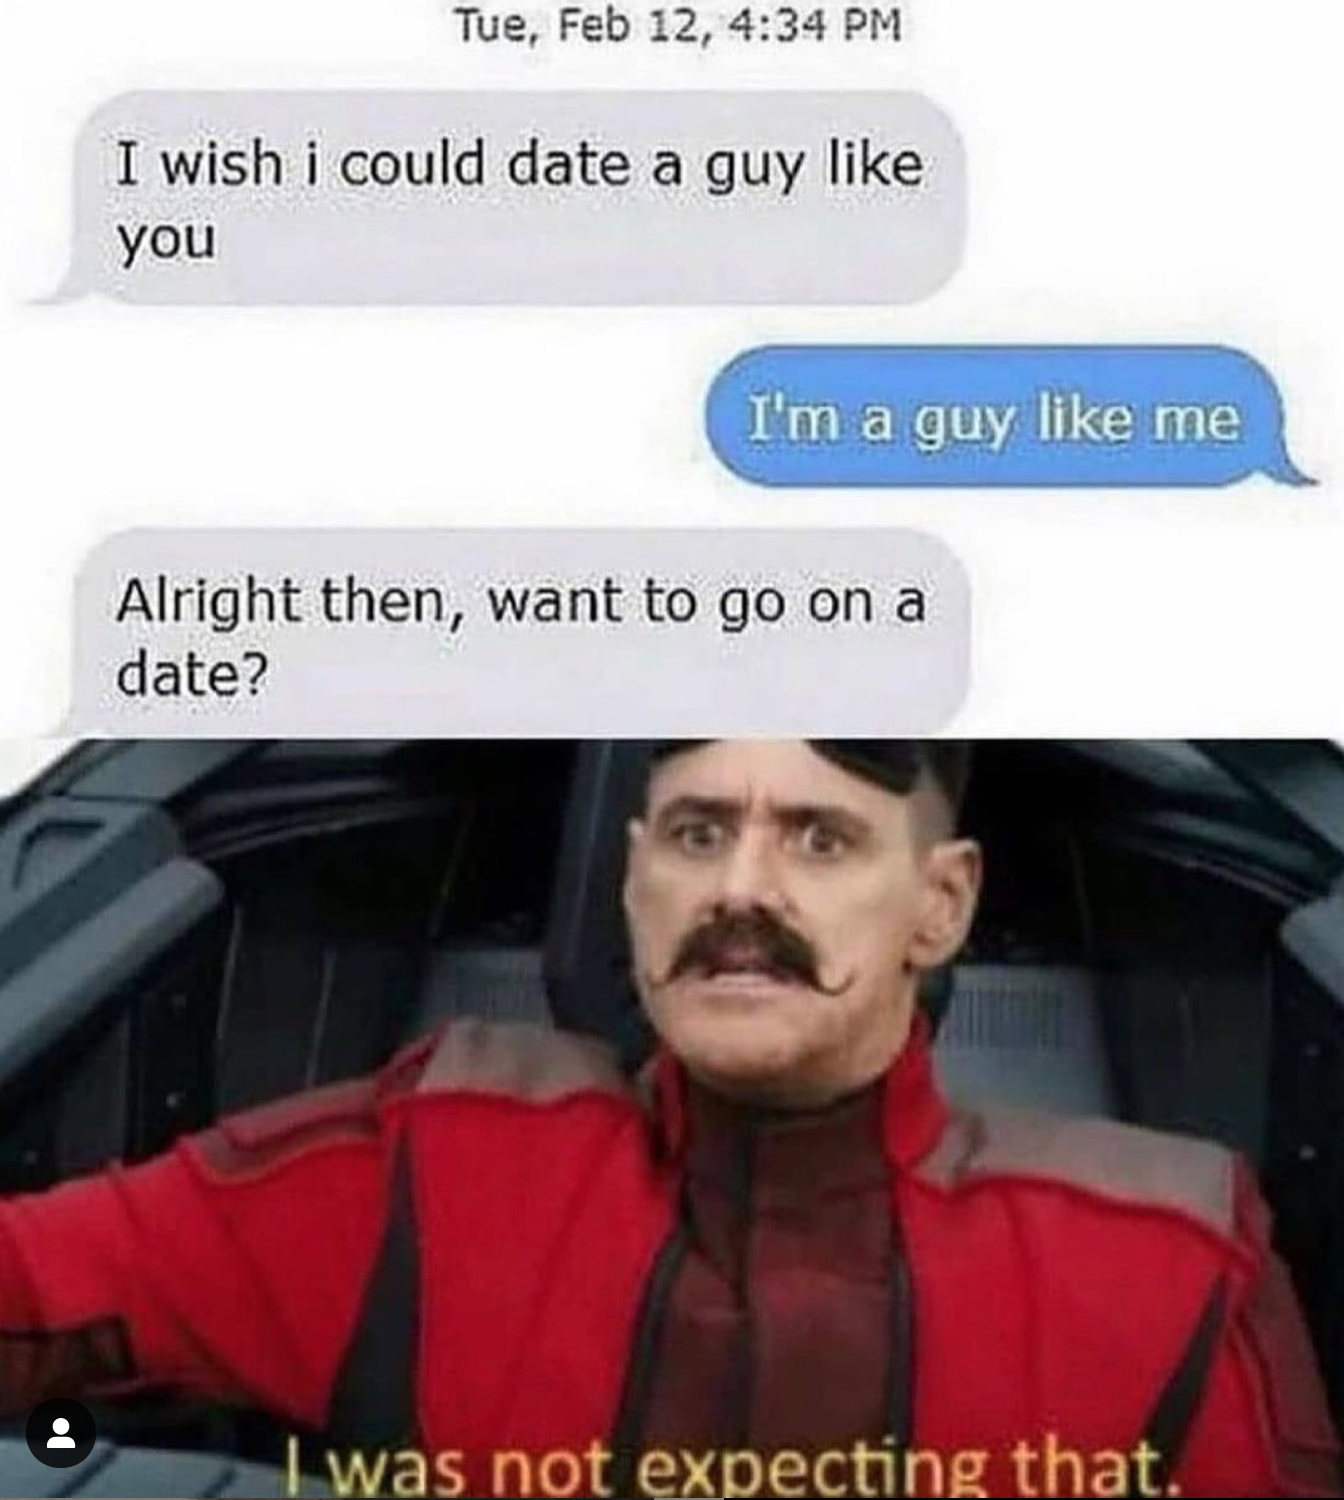 funny gaming memes  - minecraft offensive memes - Tue, Feb 12, I wish i could date a guy you I'm a guy me Alright then, want to go on a date? I was not expecting that.